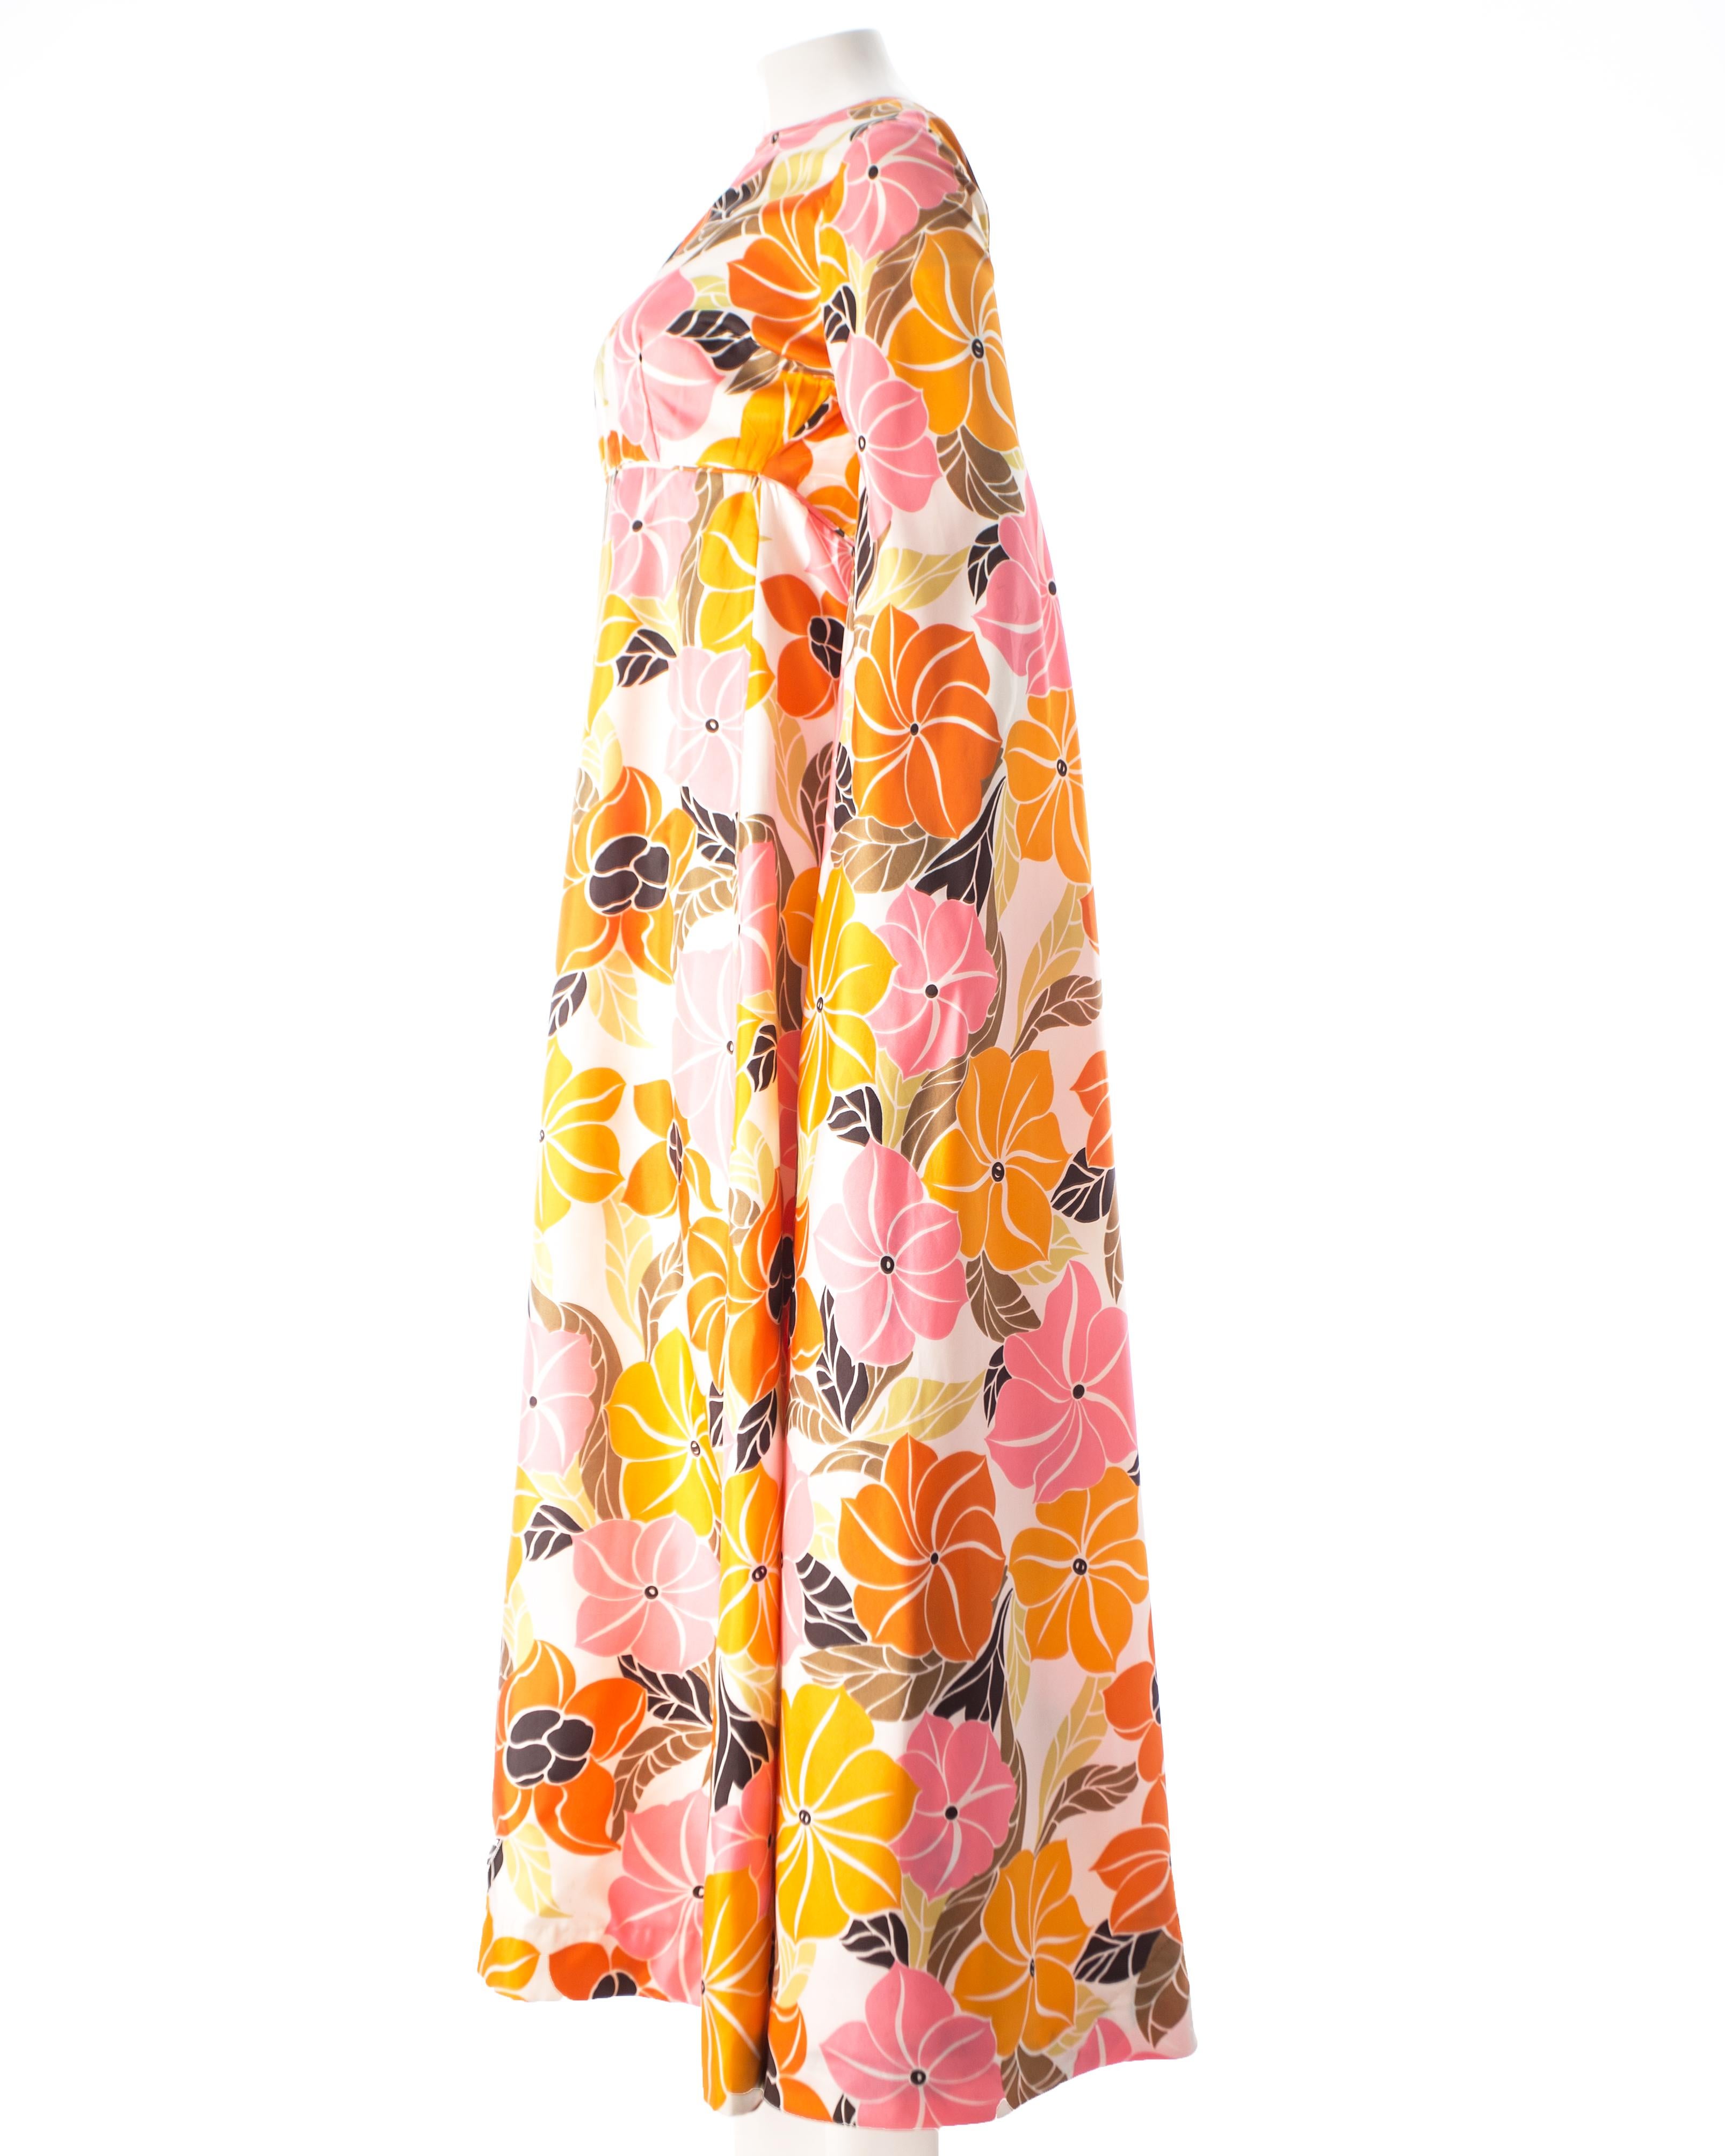 Orange Satin floral maxi dress with maxi bell sleeves, circa 1960s